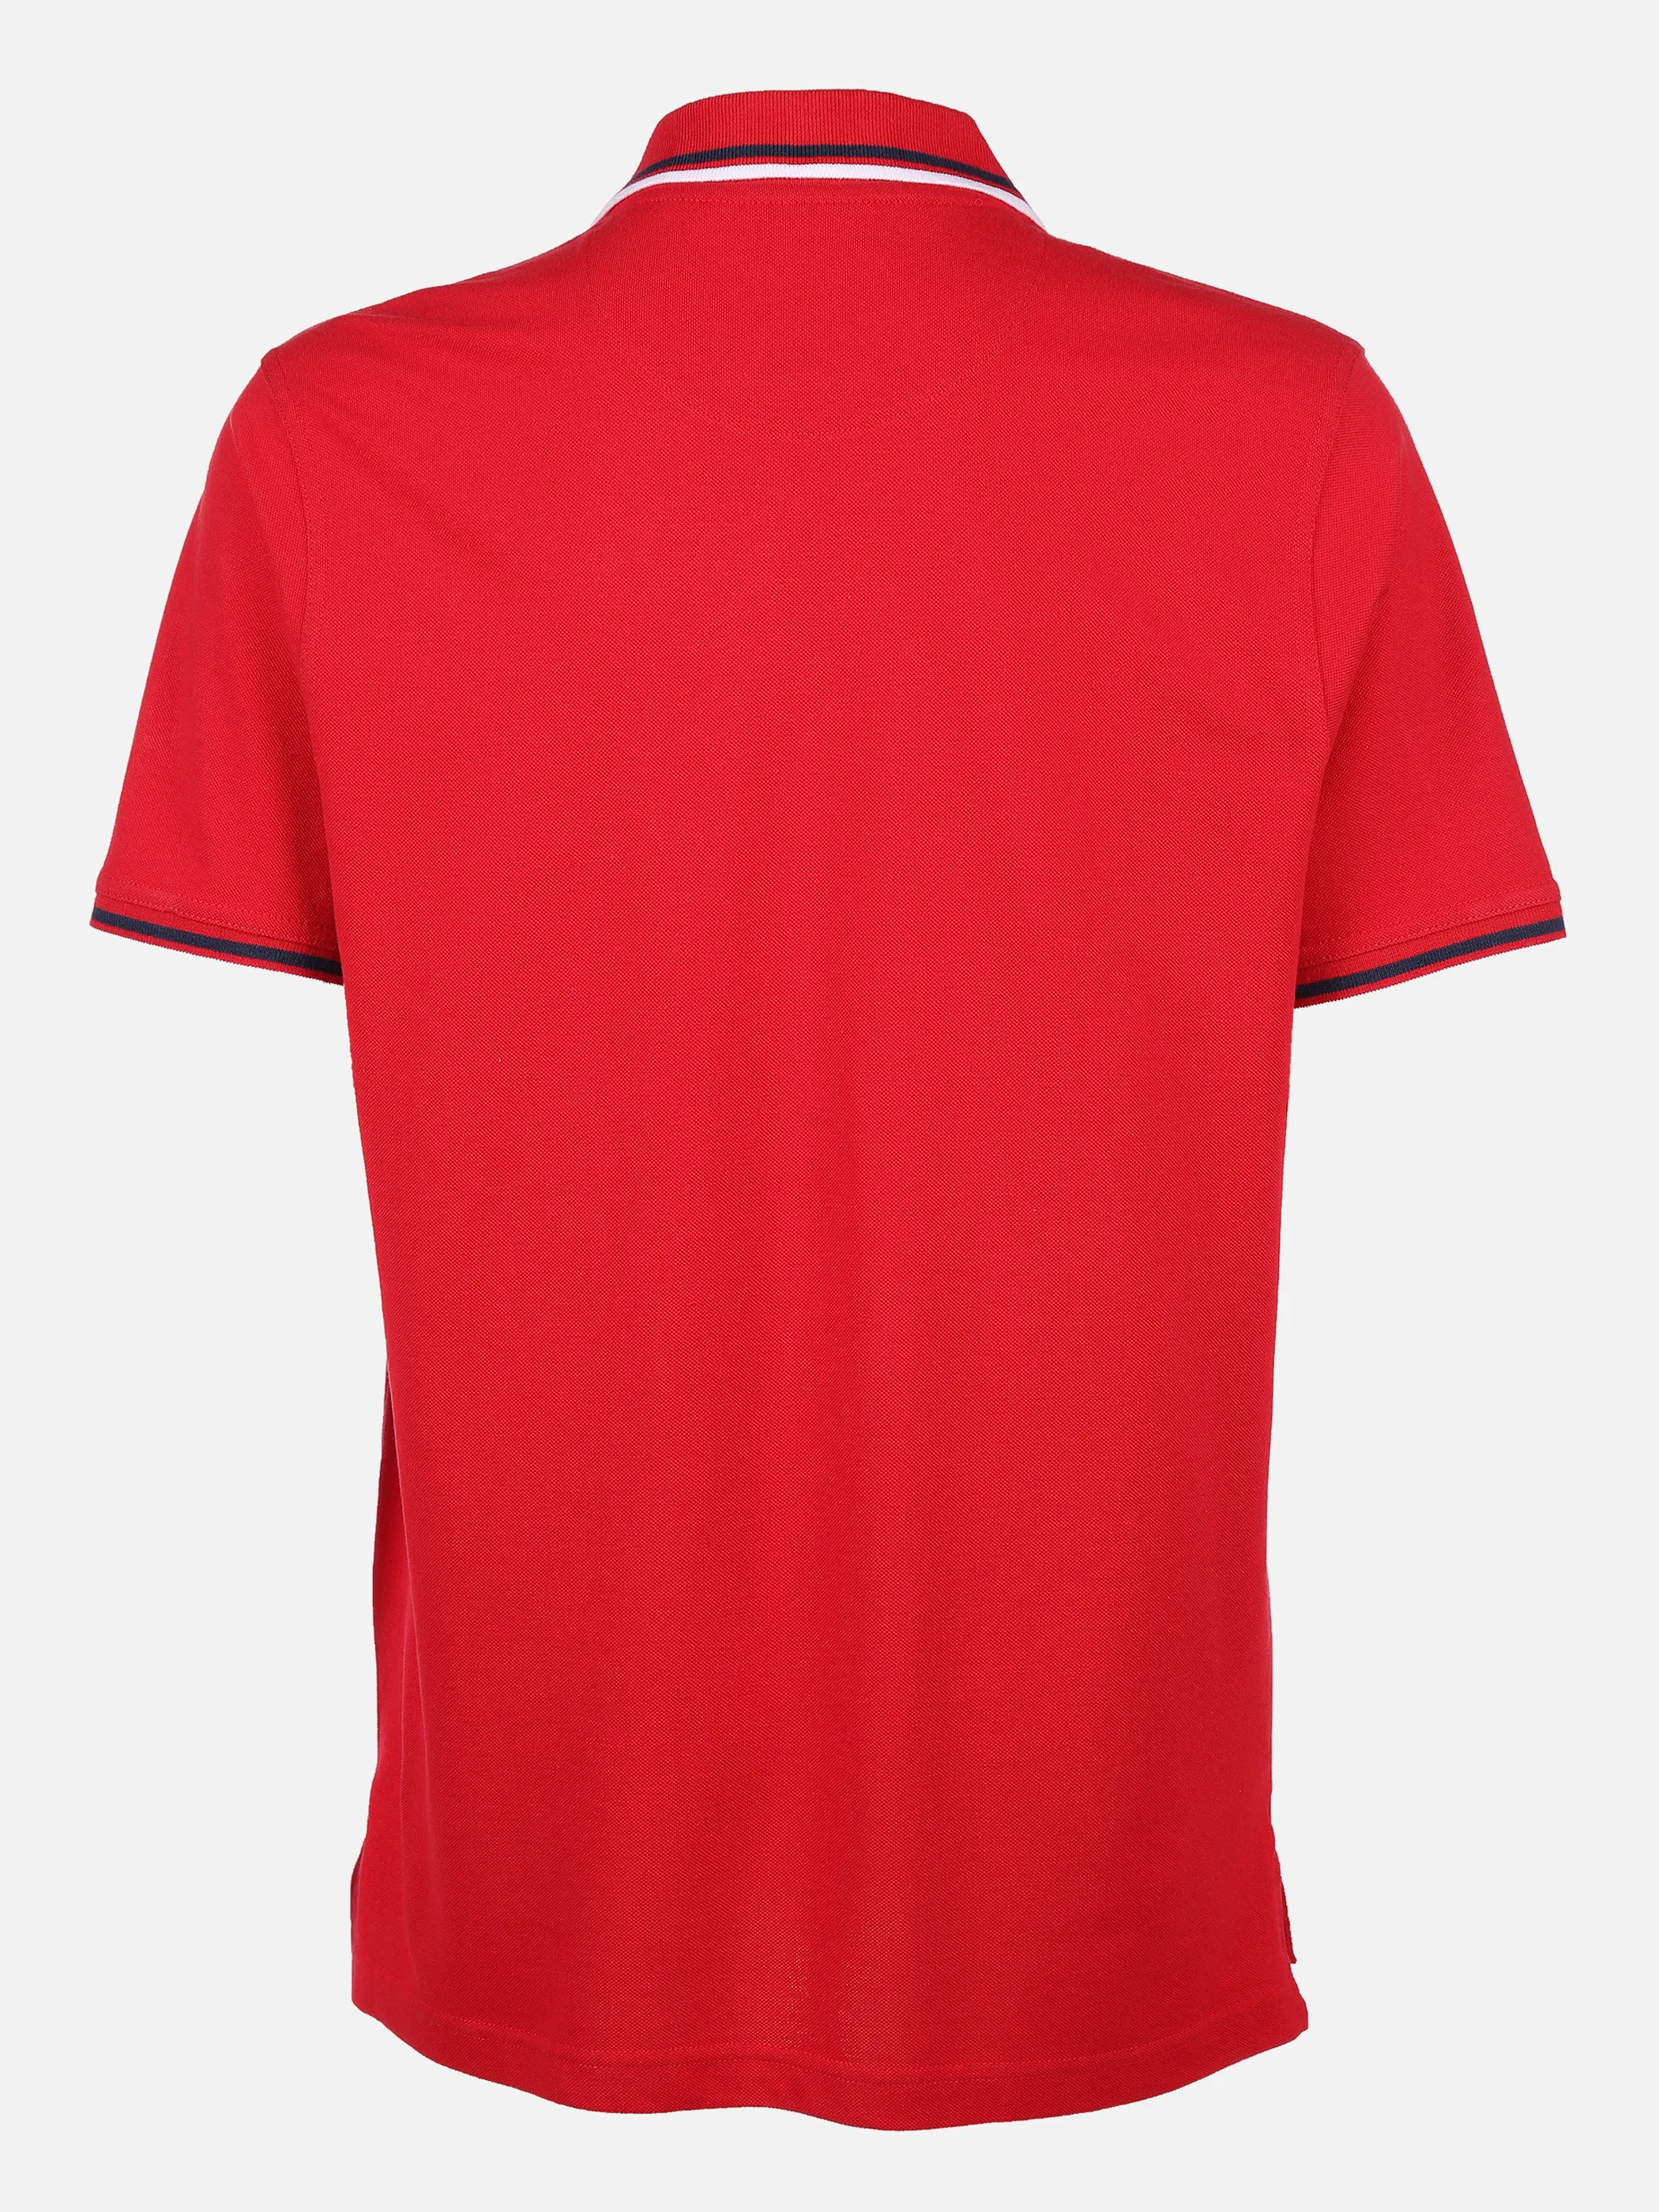 Pierre Cardin He. Poloshirt 1/2 Arm Pierre C Rot 810846 RED 2